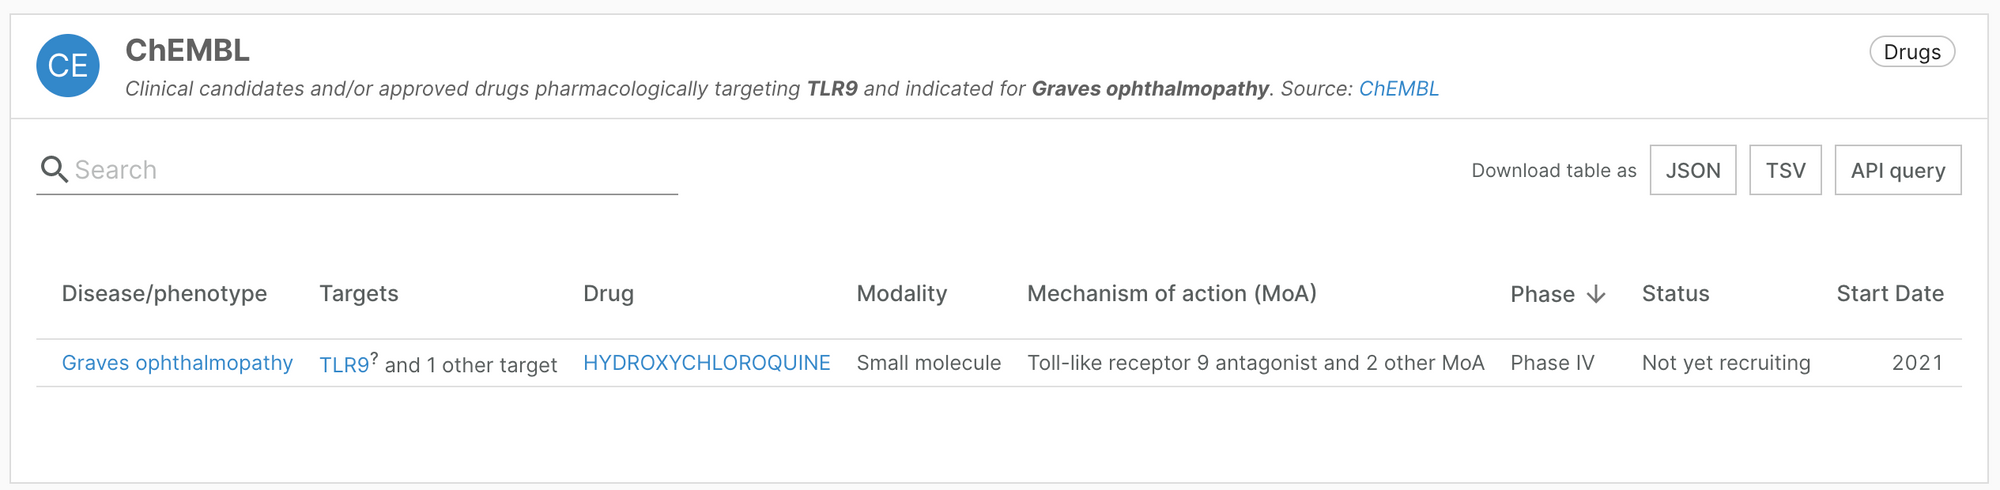 ChEMBL widget in the Open Targets Platform, showing one entry linking Grave's ophthalmopathy to TLR9 through the drug hydroxycholoquine.